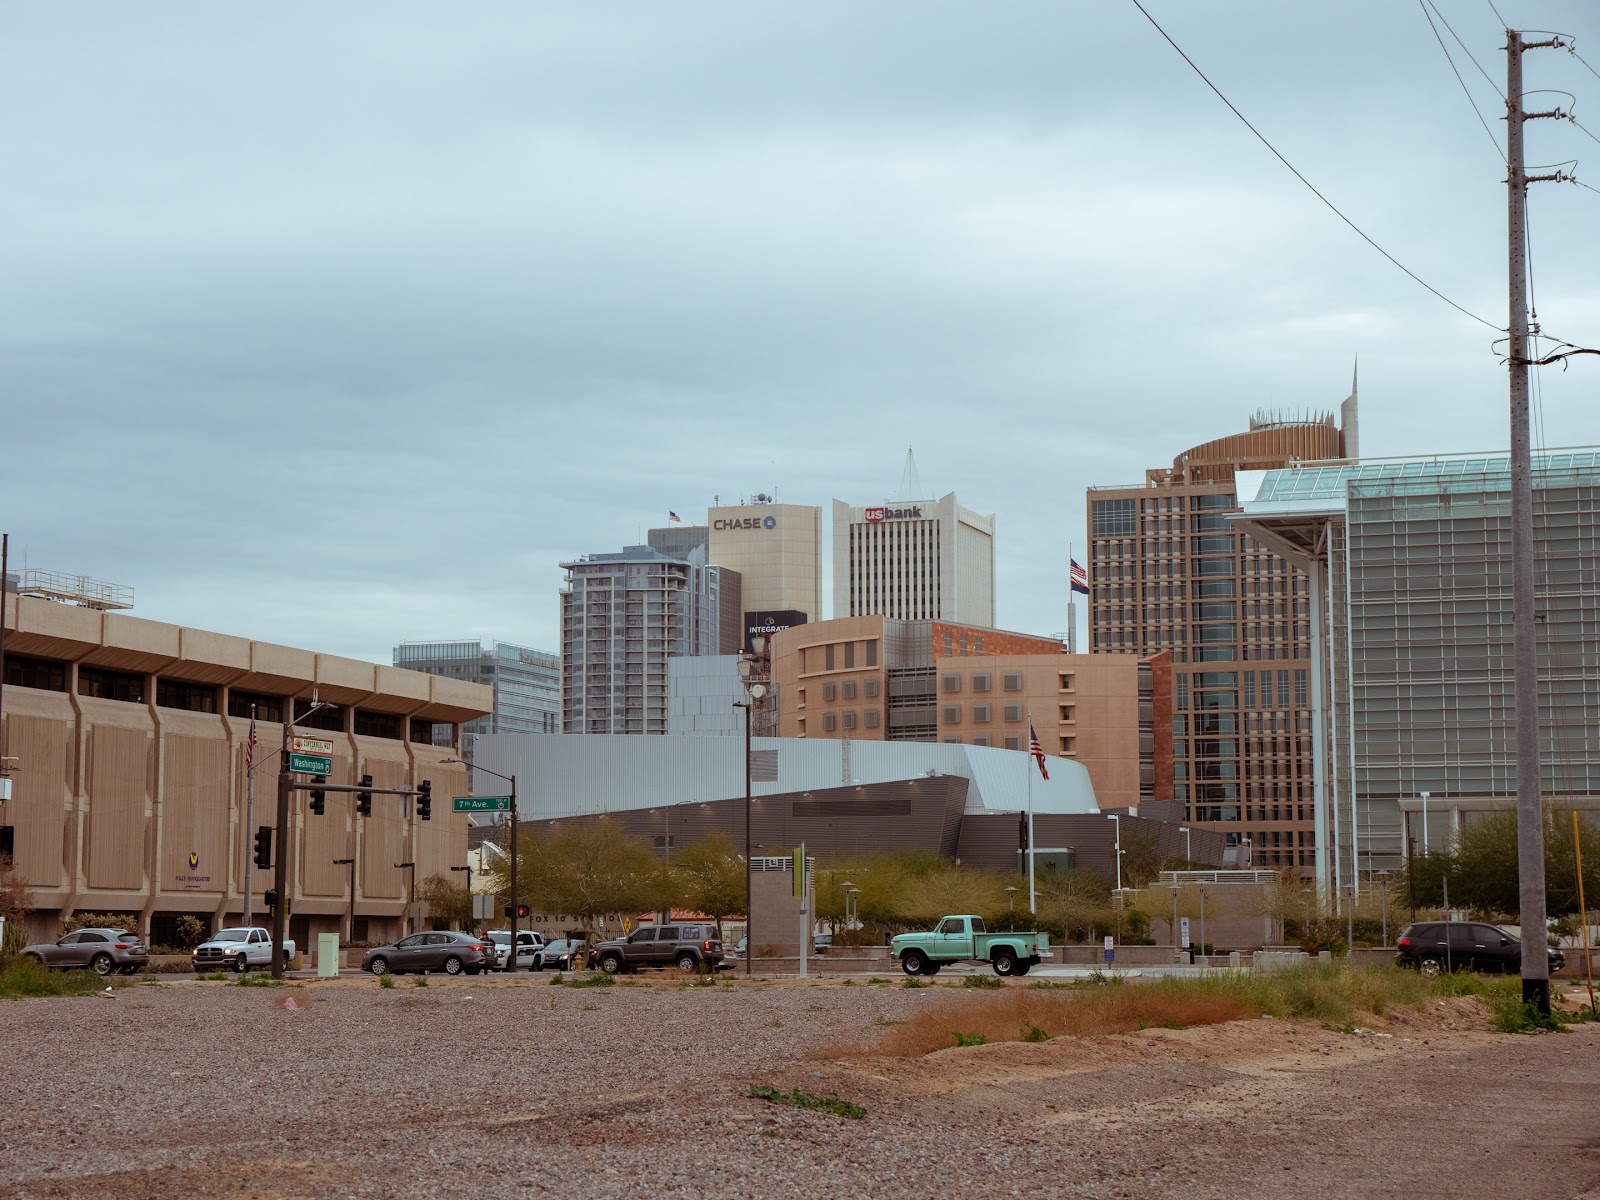 An empty lot with a city skyline in the background.